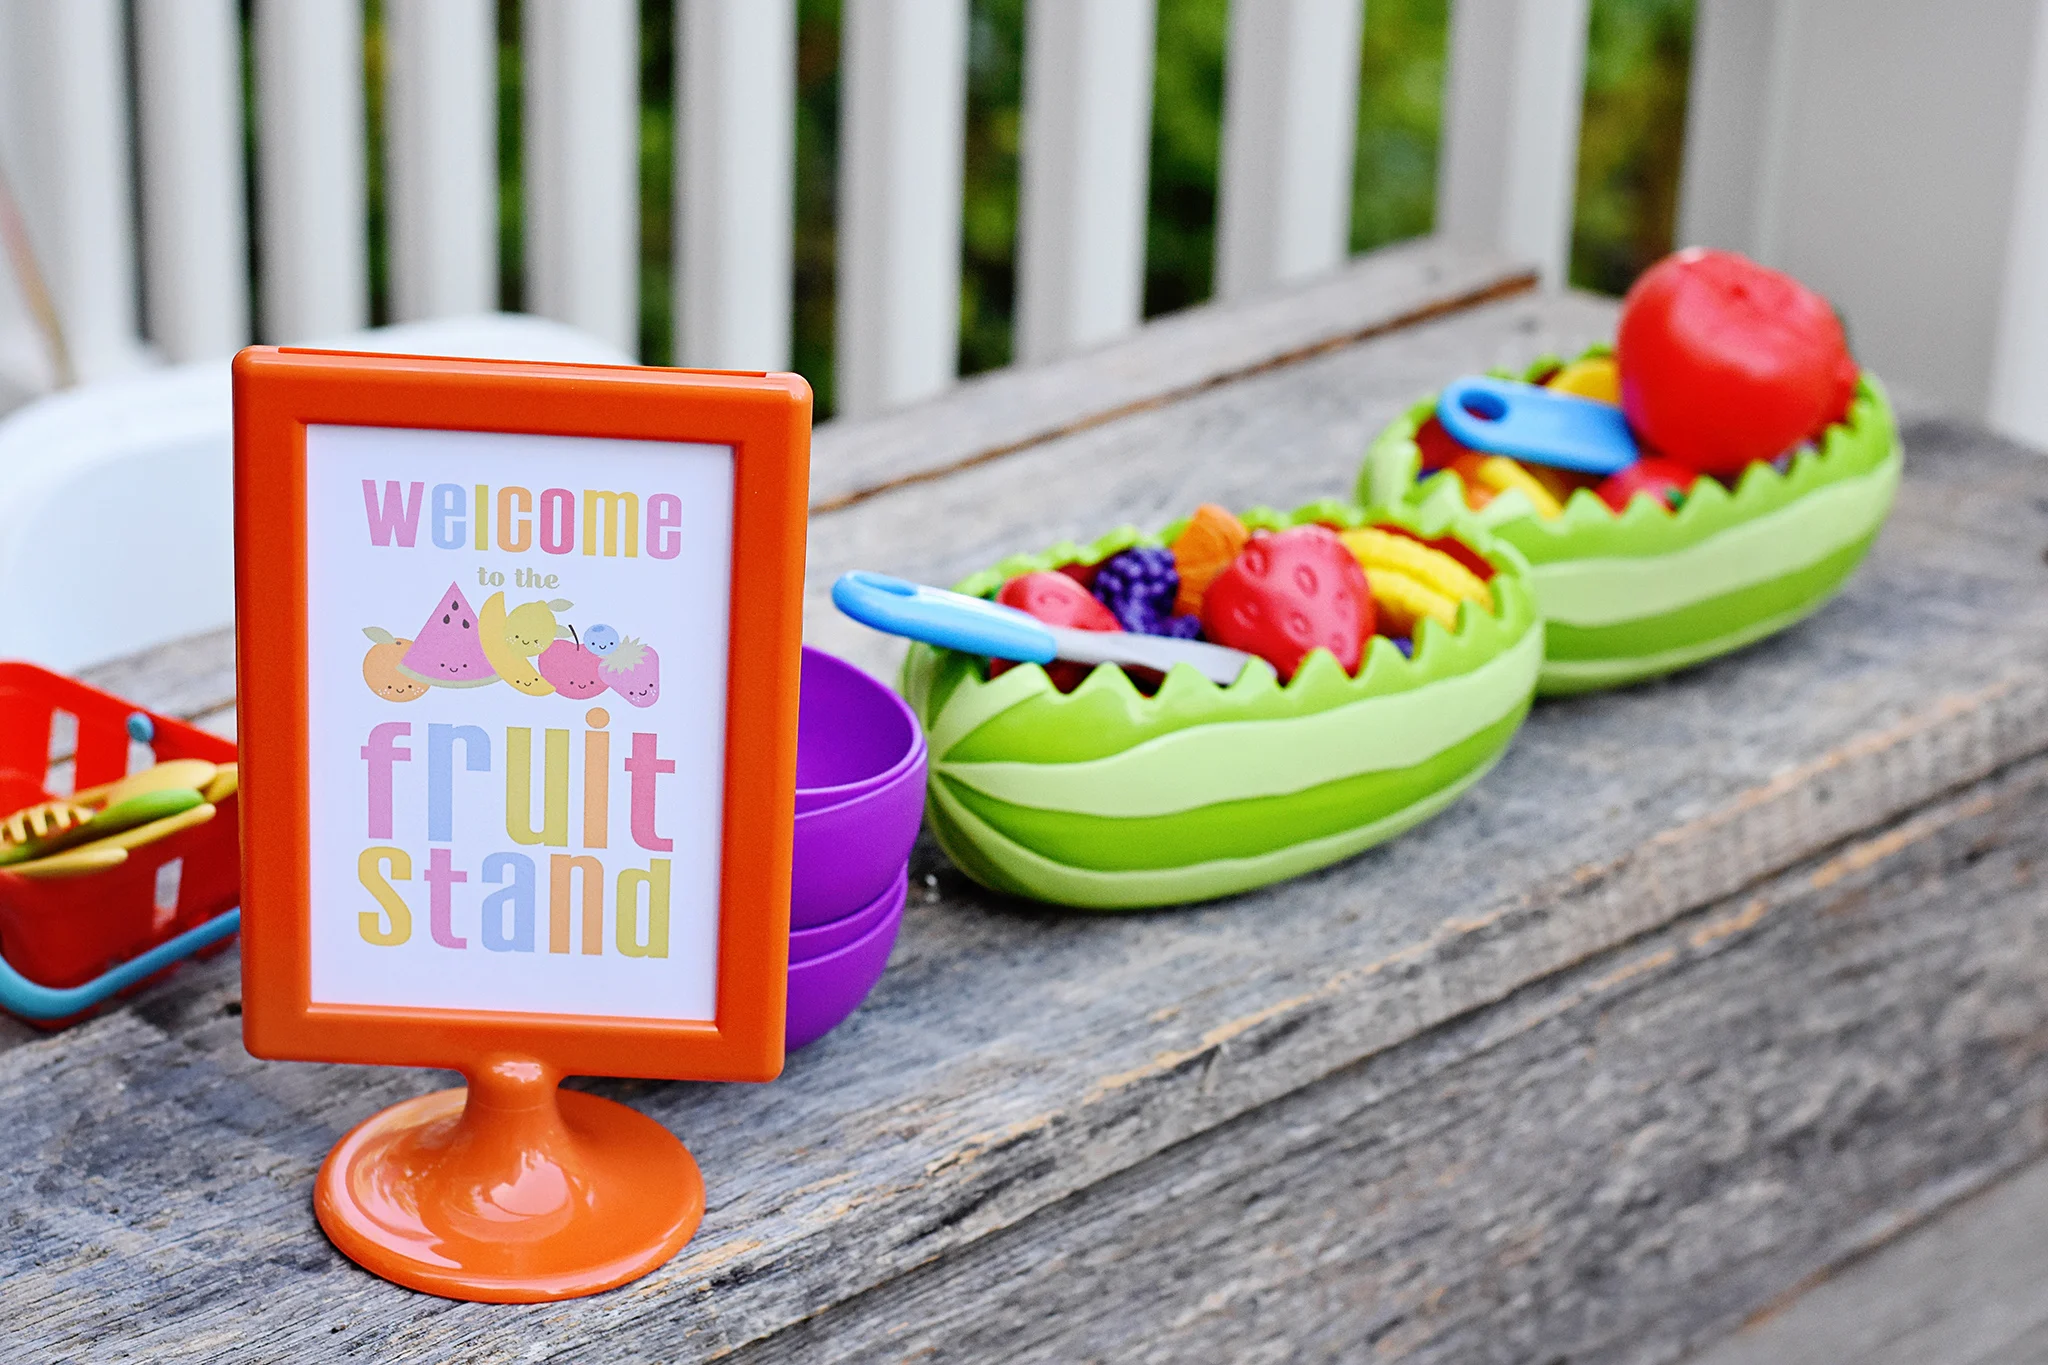 Play Fruit Stand for Tutti Frutti Birthday Party - Project Nursery